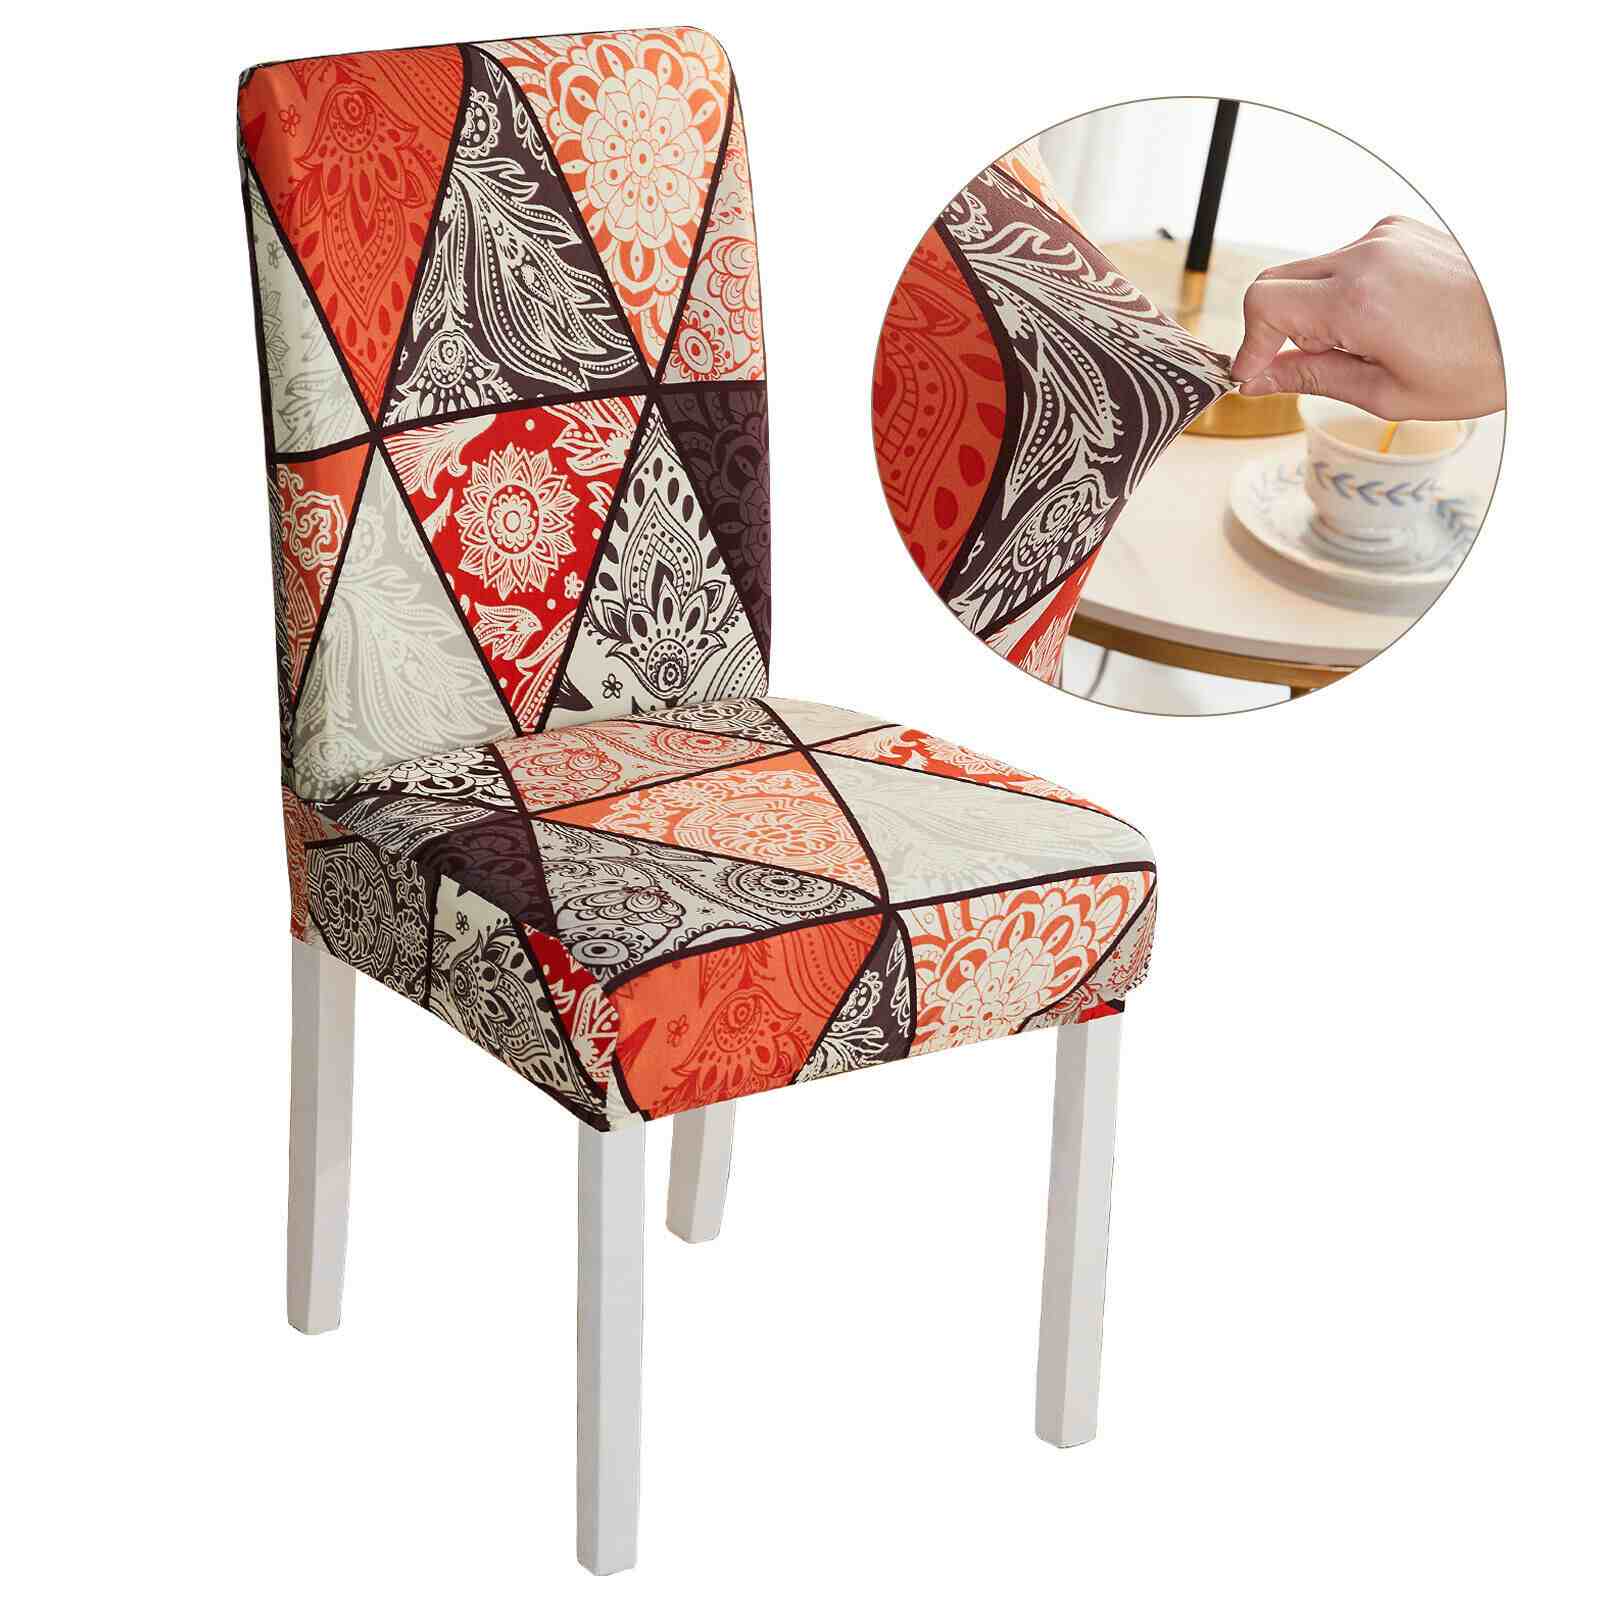 Display of Boho Printed Stretchable Dining Chair Slipcovers, 1/4/6Pcs